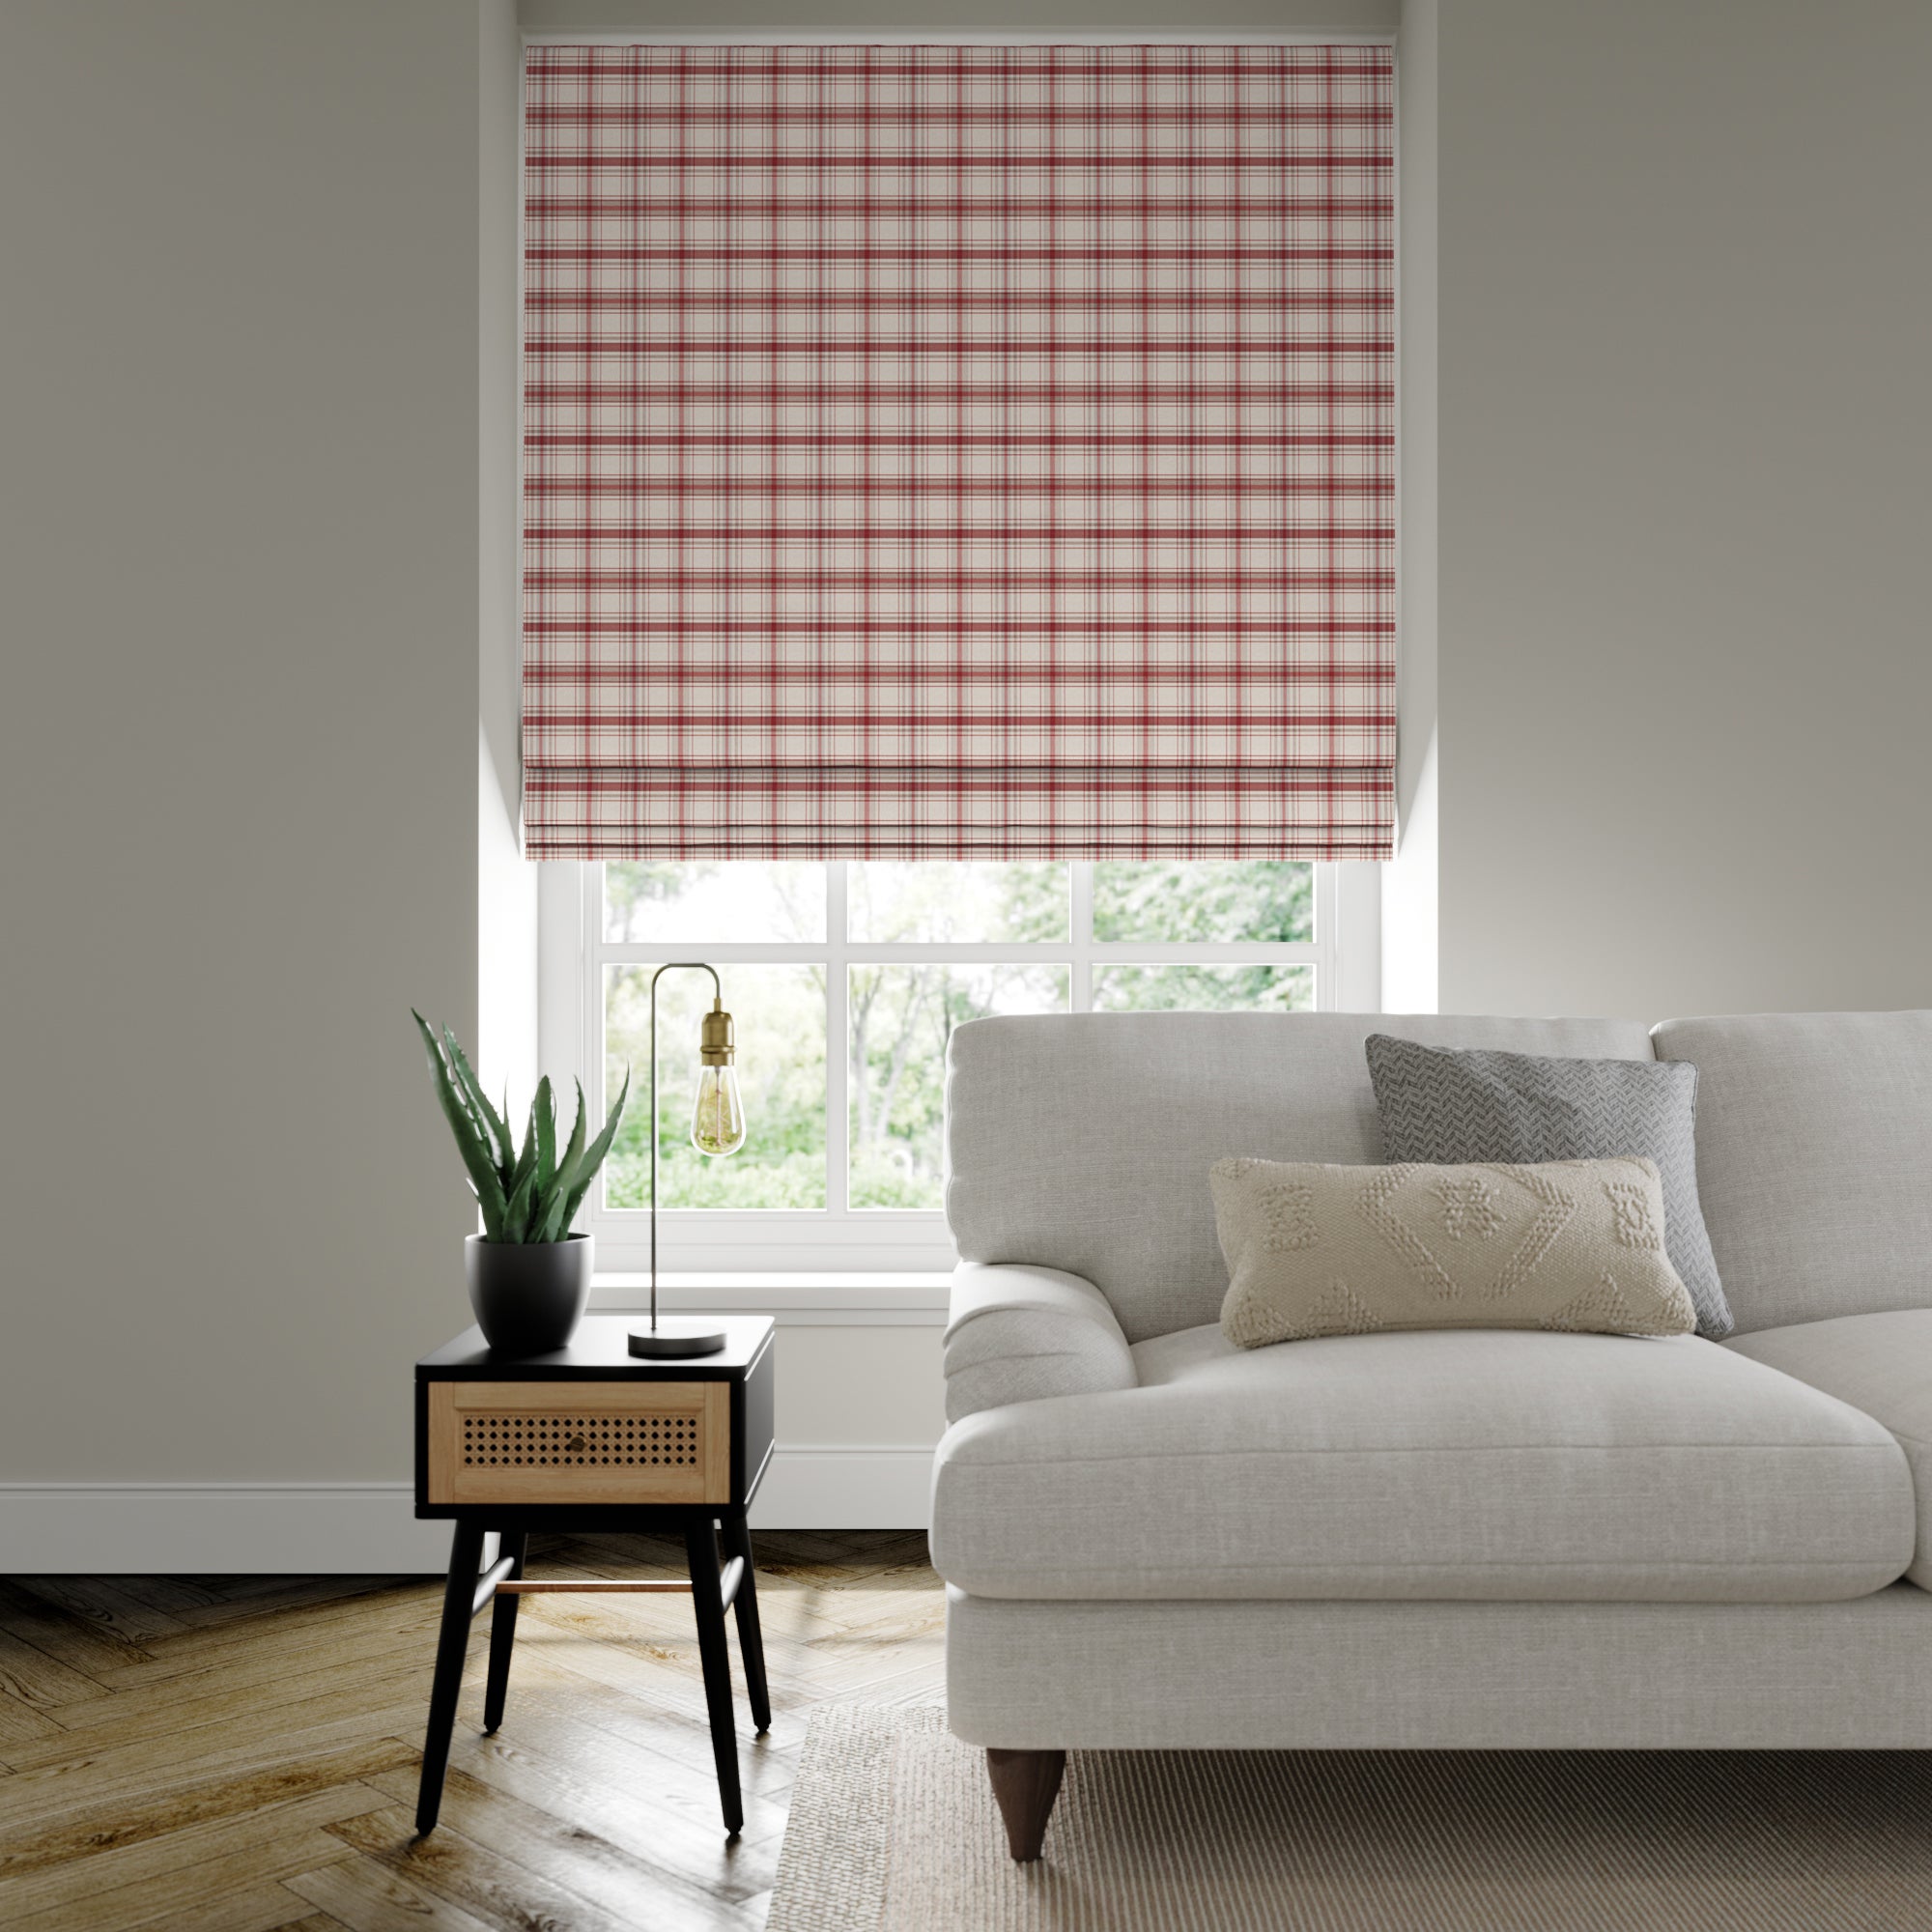 Esk Made to Measure Fire Retardant Roman Blind Red